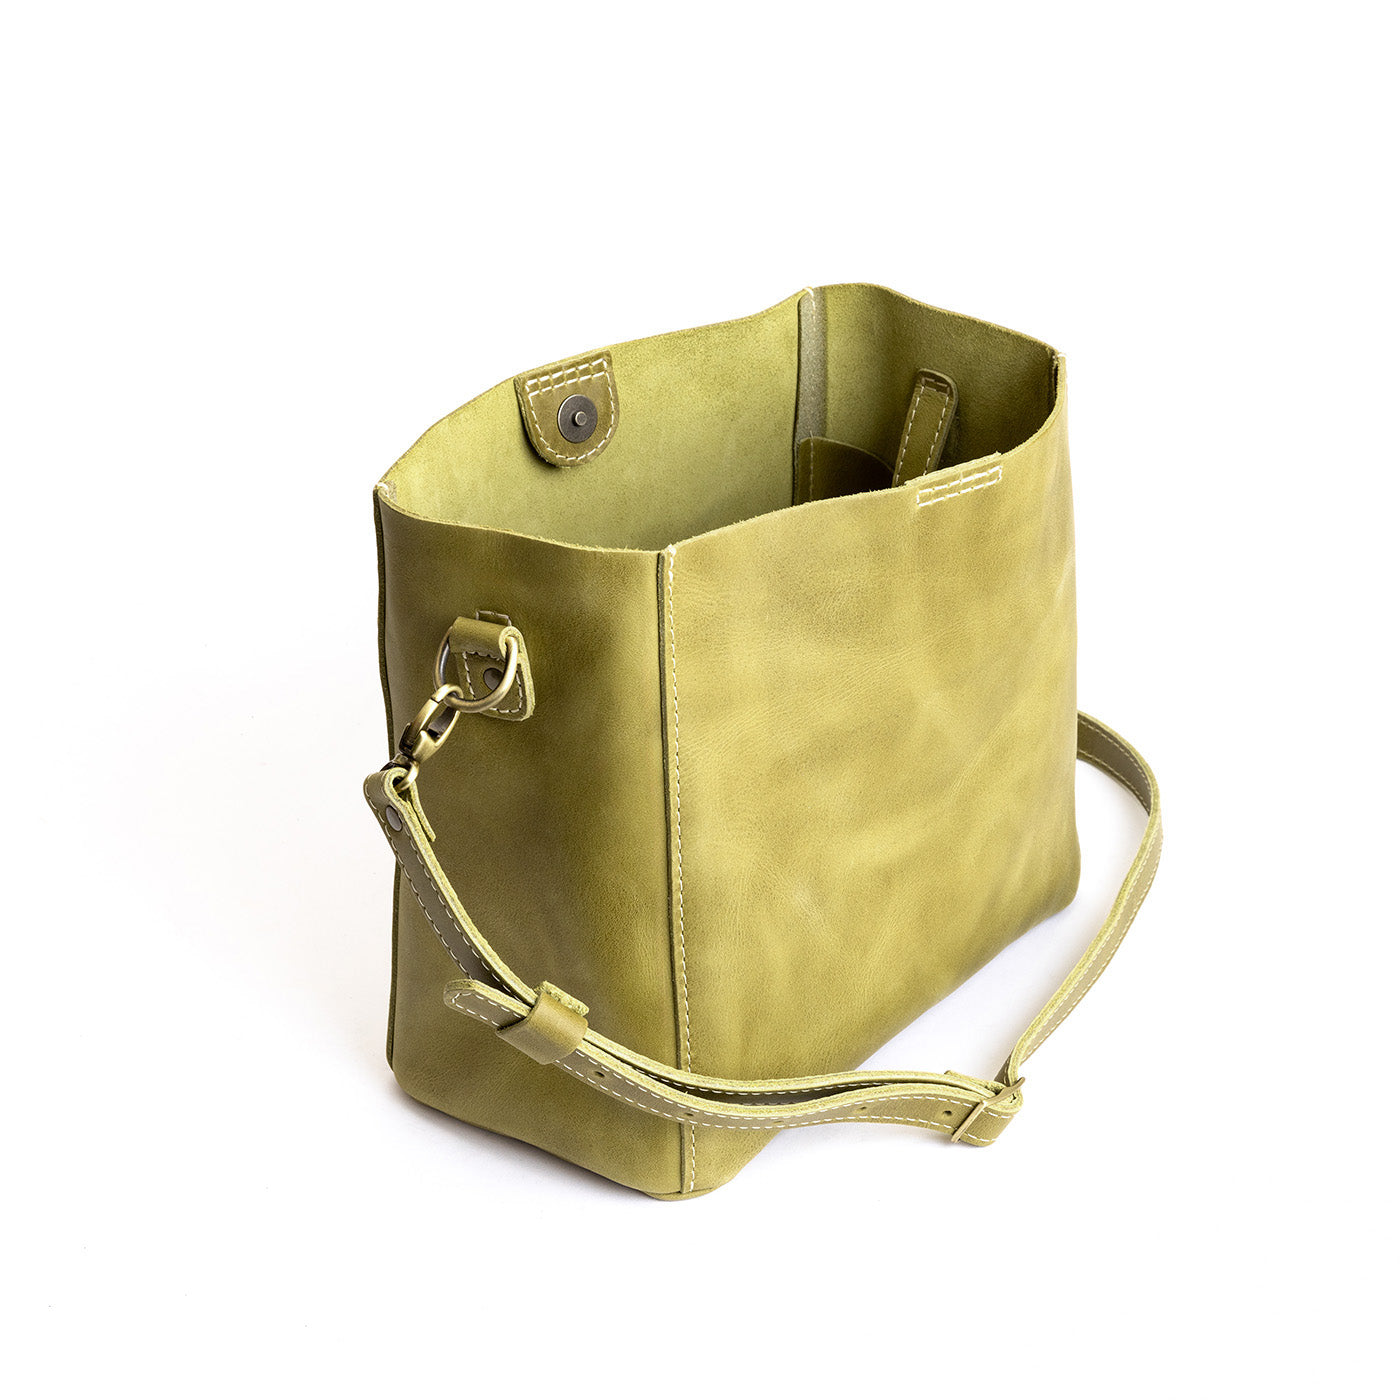  Anjou | symmetrical bucket bag with latch closure and removable crossbody strap